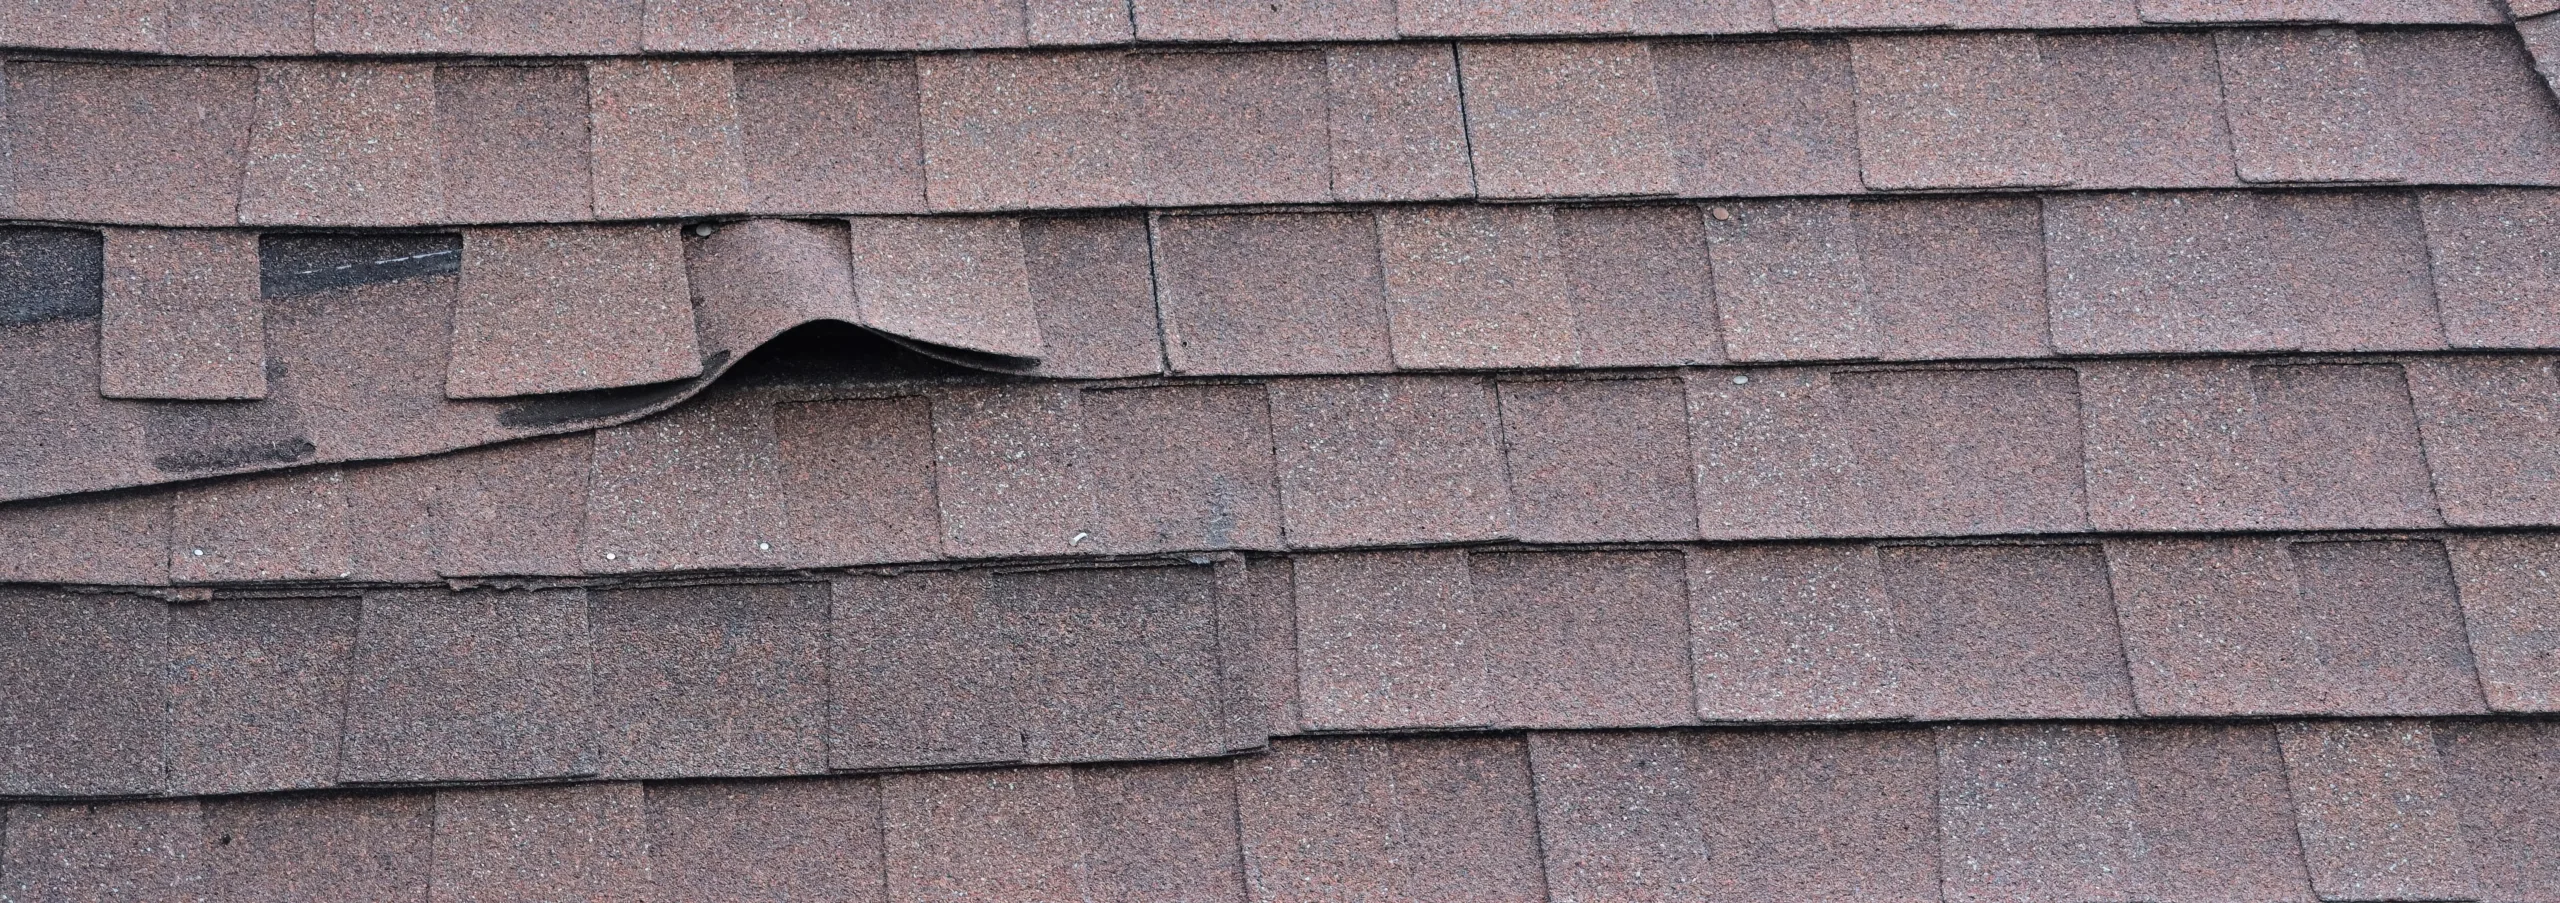 Lifting Shingles: How This Happens & What to do